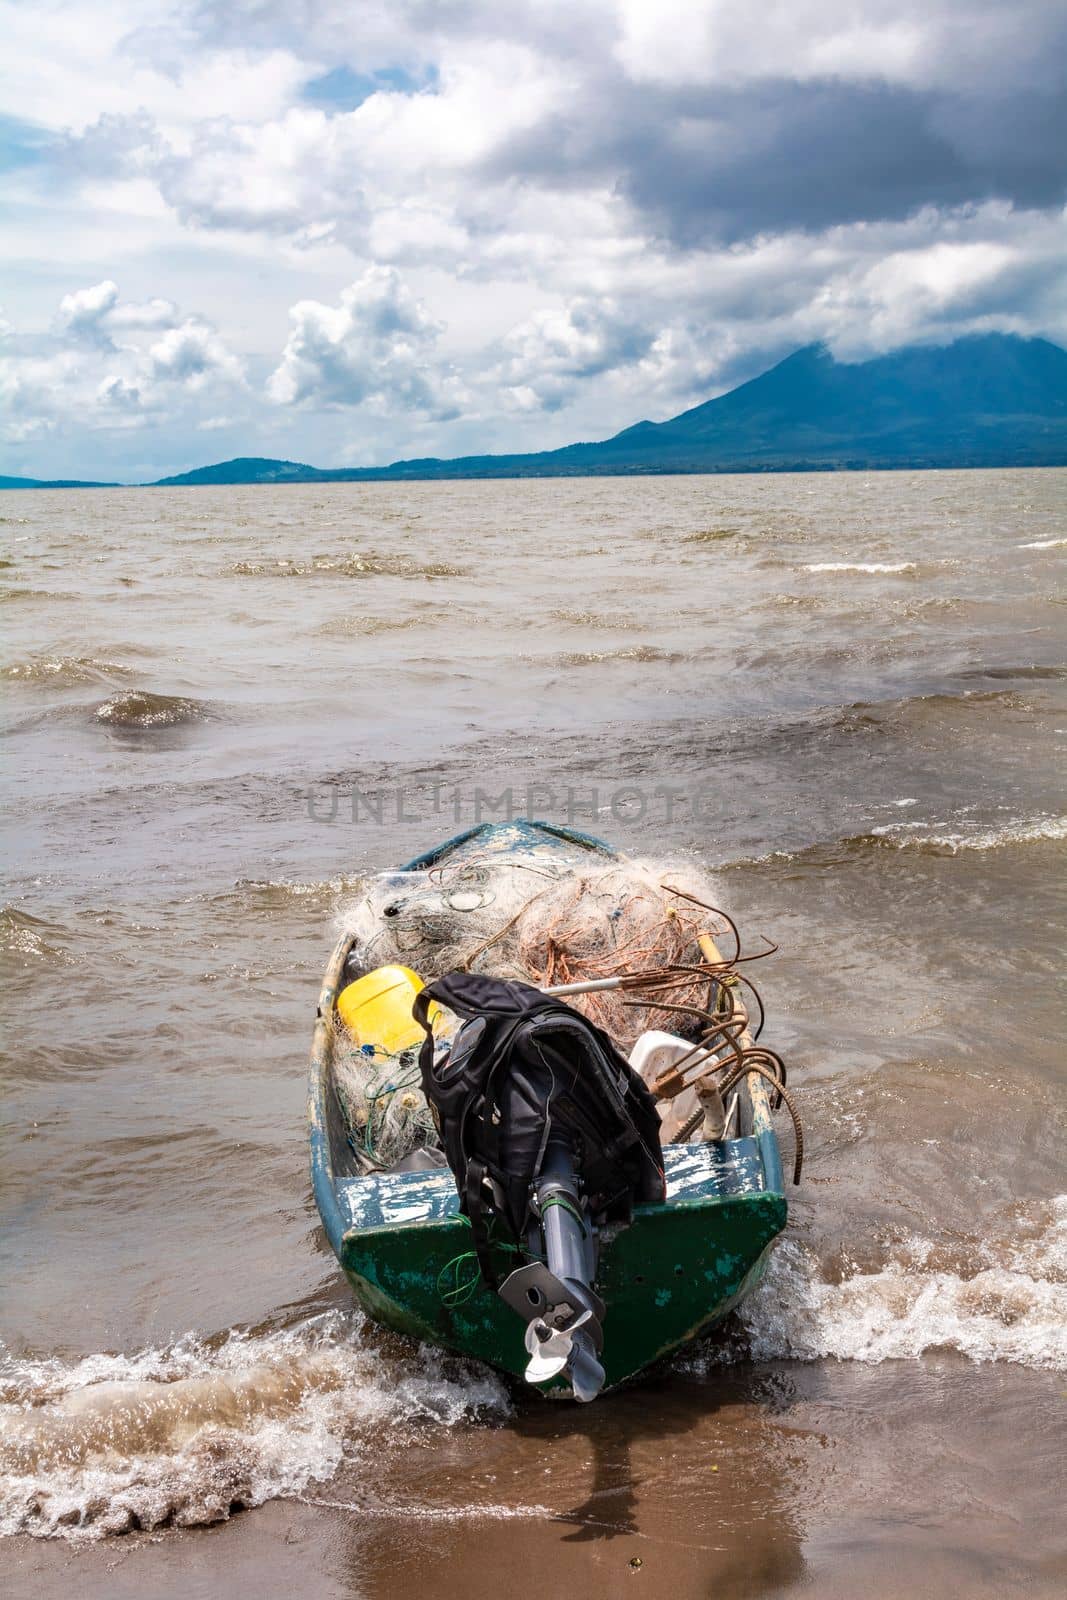 Fishing boat on the shore of a lake. A fishing boat on the shore of a lake with volcanoes in the background. A fishing boat on a lake in Nicaragua. Concept of fishing boats parked at the seaside by isaiphoto